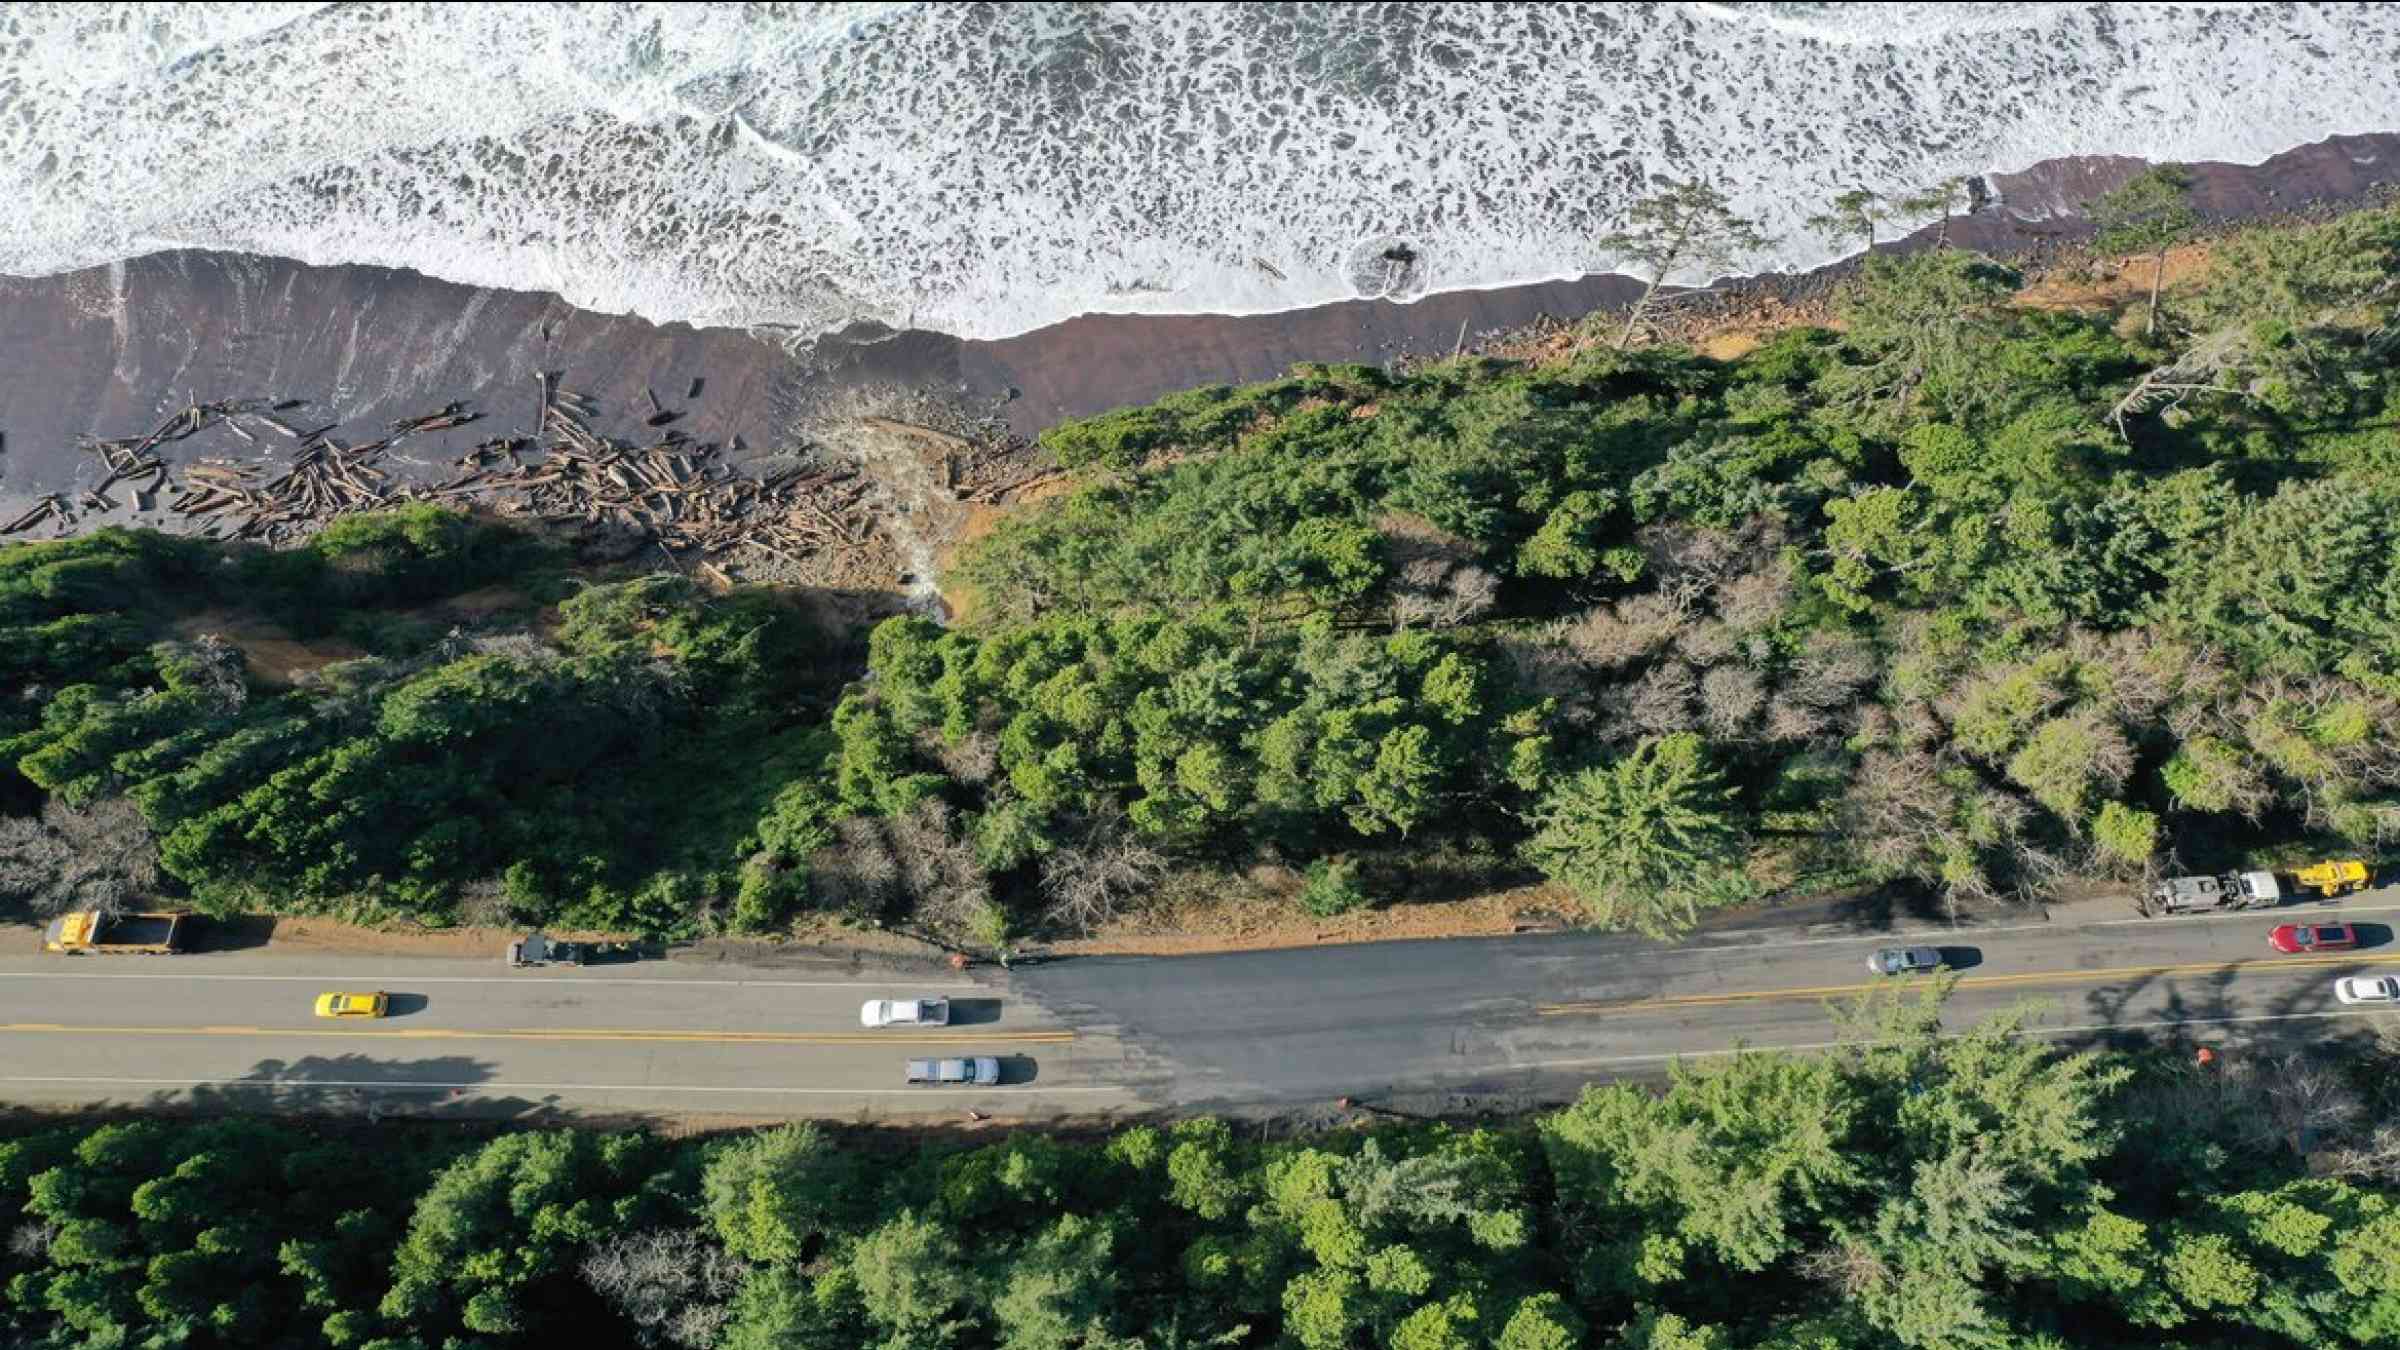 Repairs to an active landslide on U.S. Route 101 in 2021